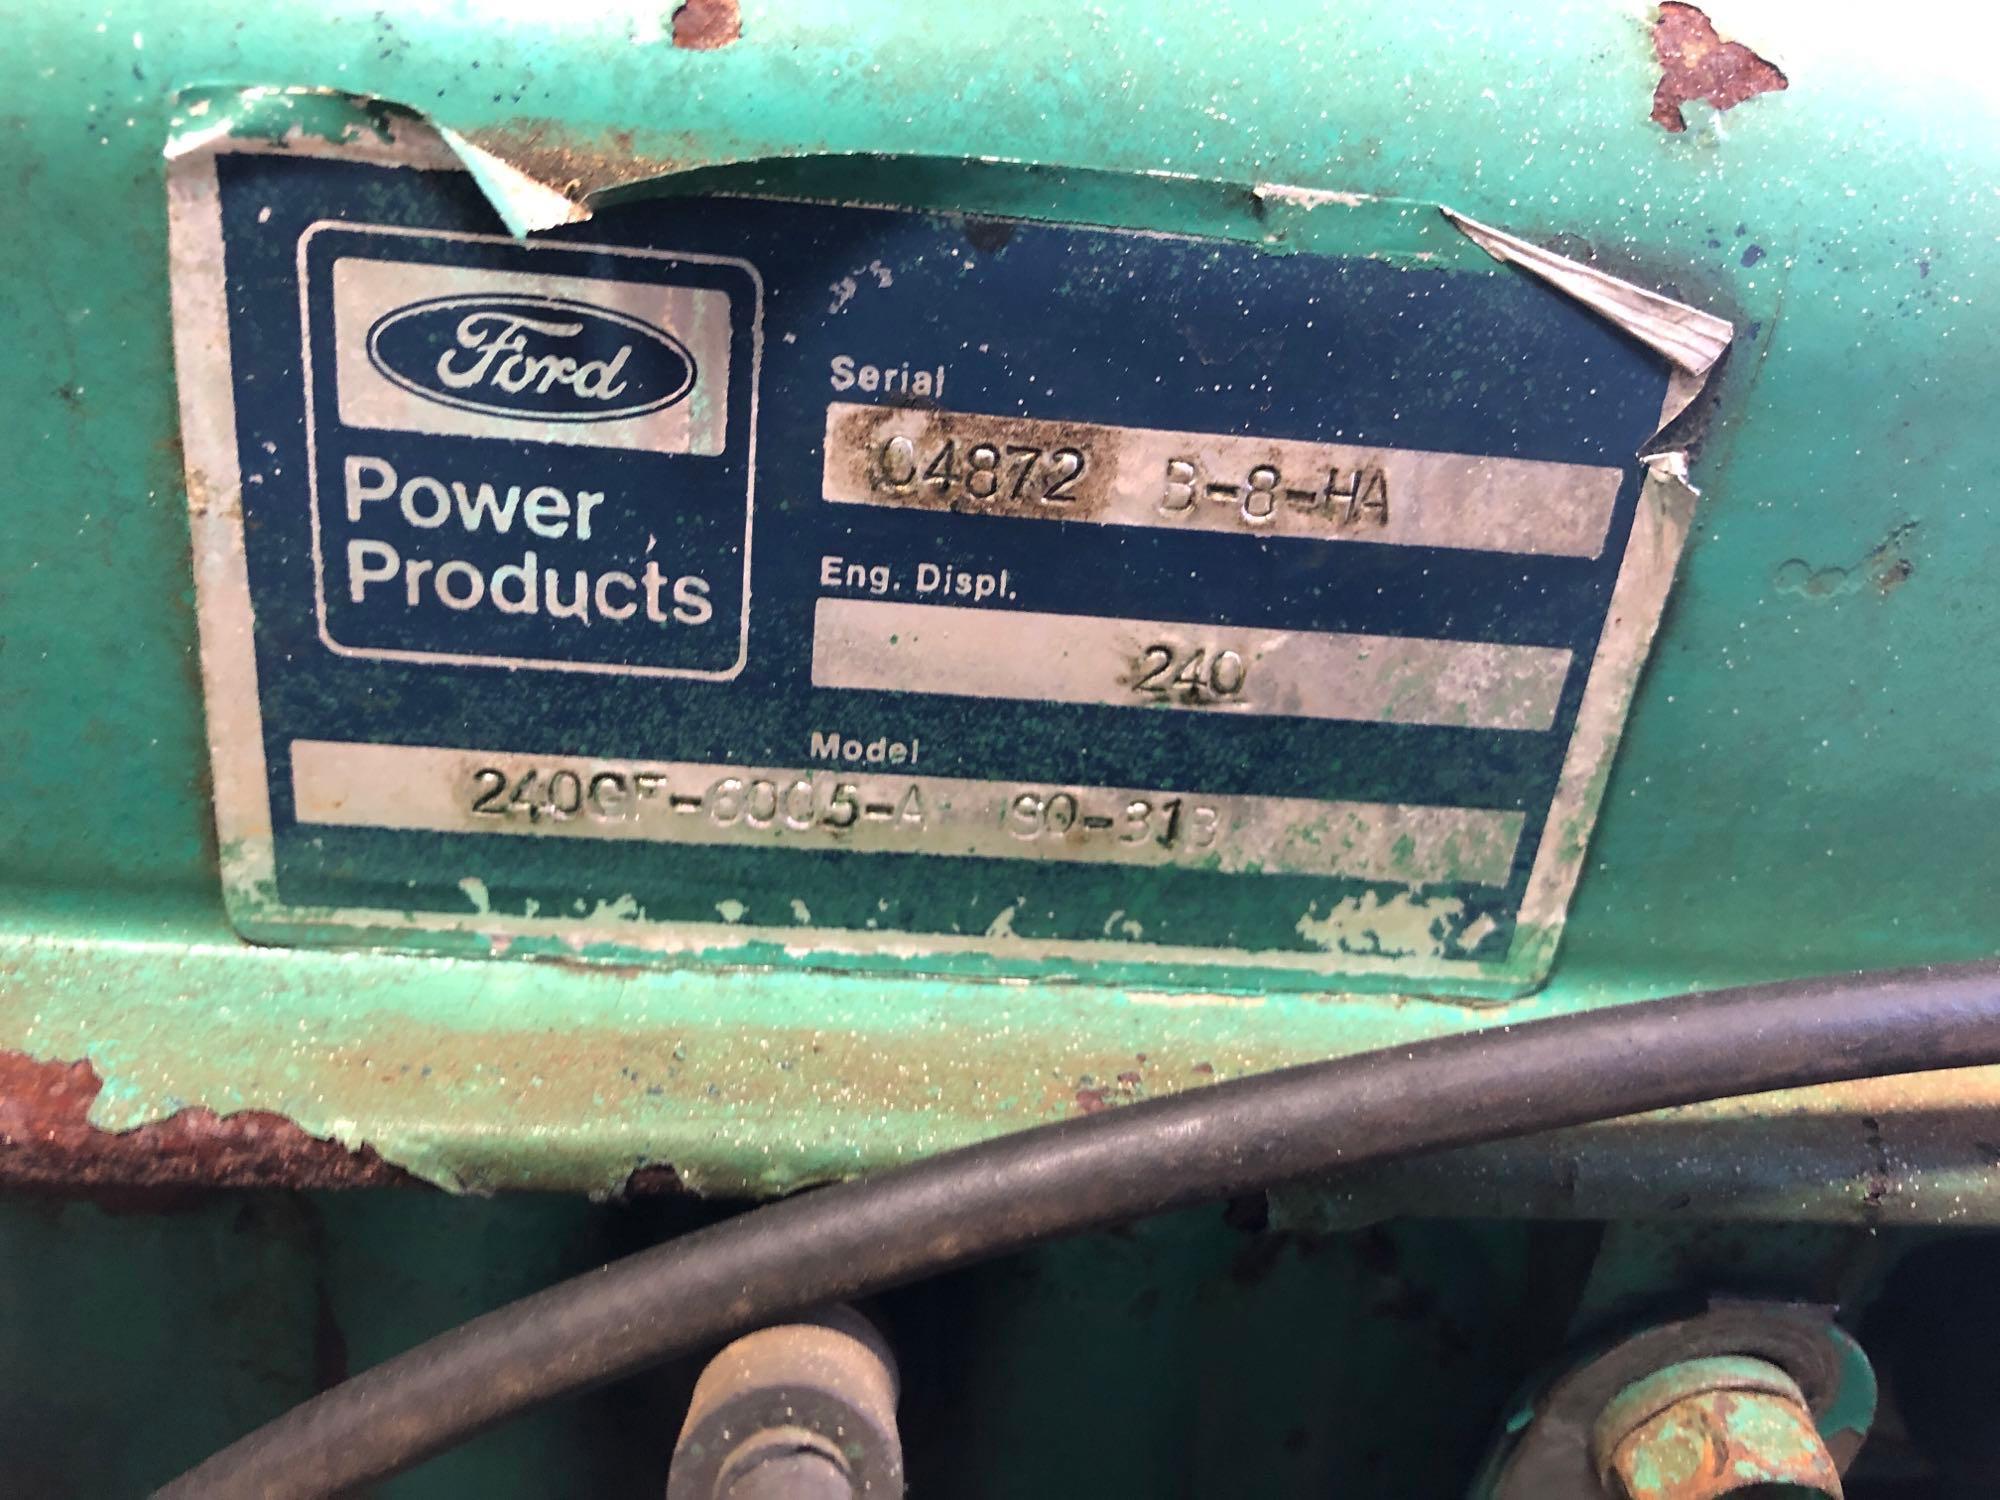 Generator, Onan 20KW, 6 cyl Ford power, gasoline, natural gas or propane, works well.